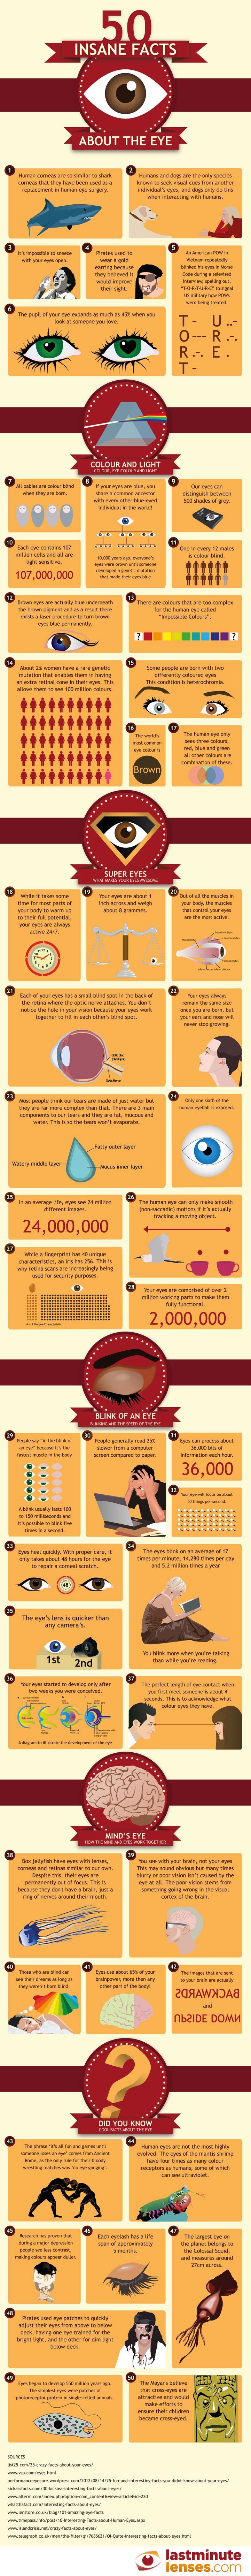 50 Amazing Facts About the Eye Infographic